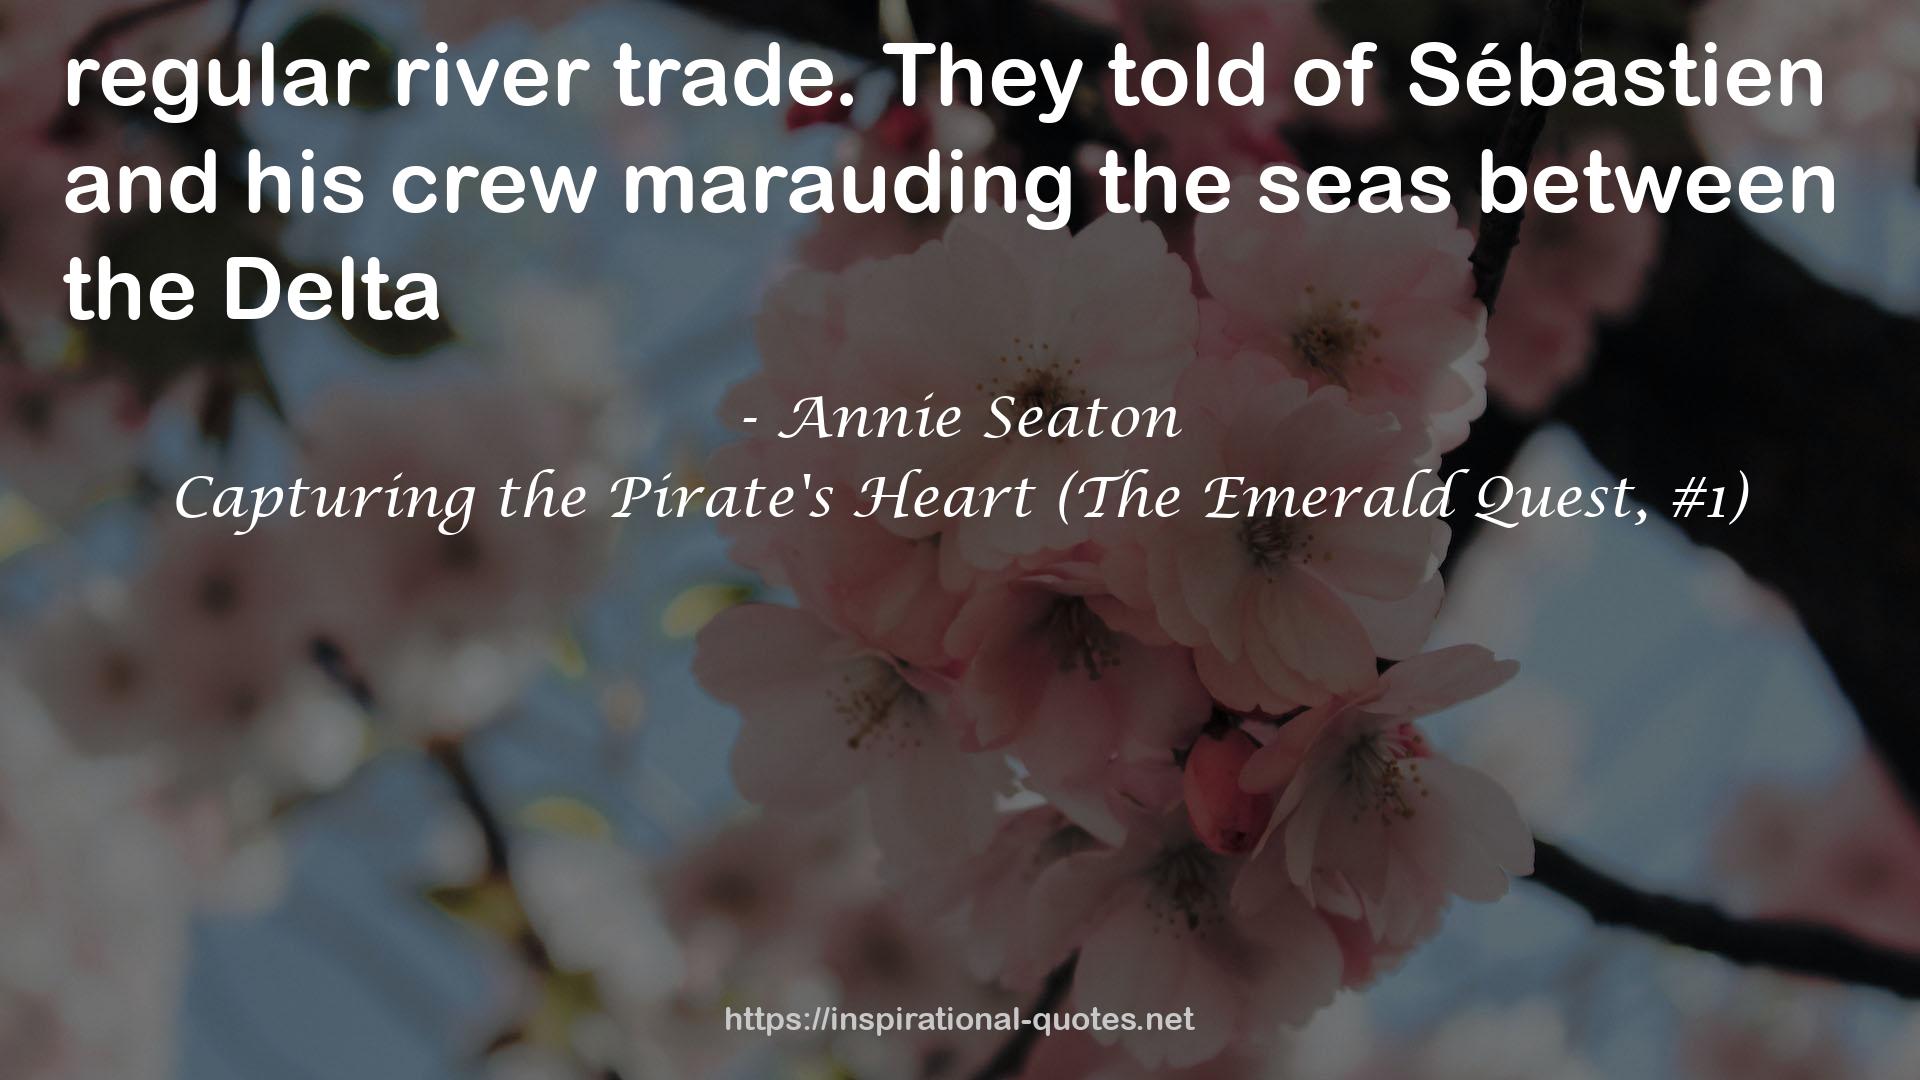 Capturing the Pirate's Heart (The Emerald Quest, #1) QUOTES